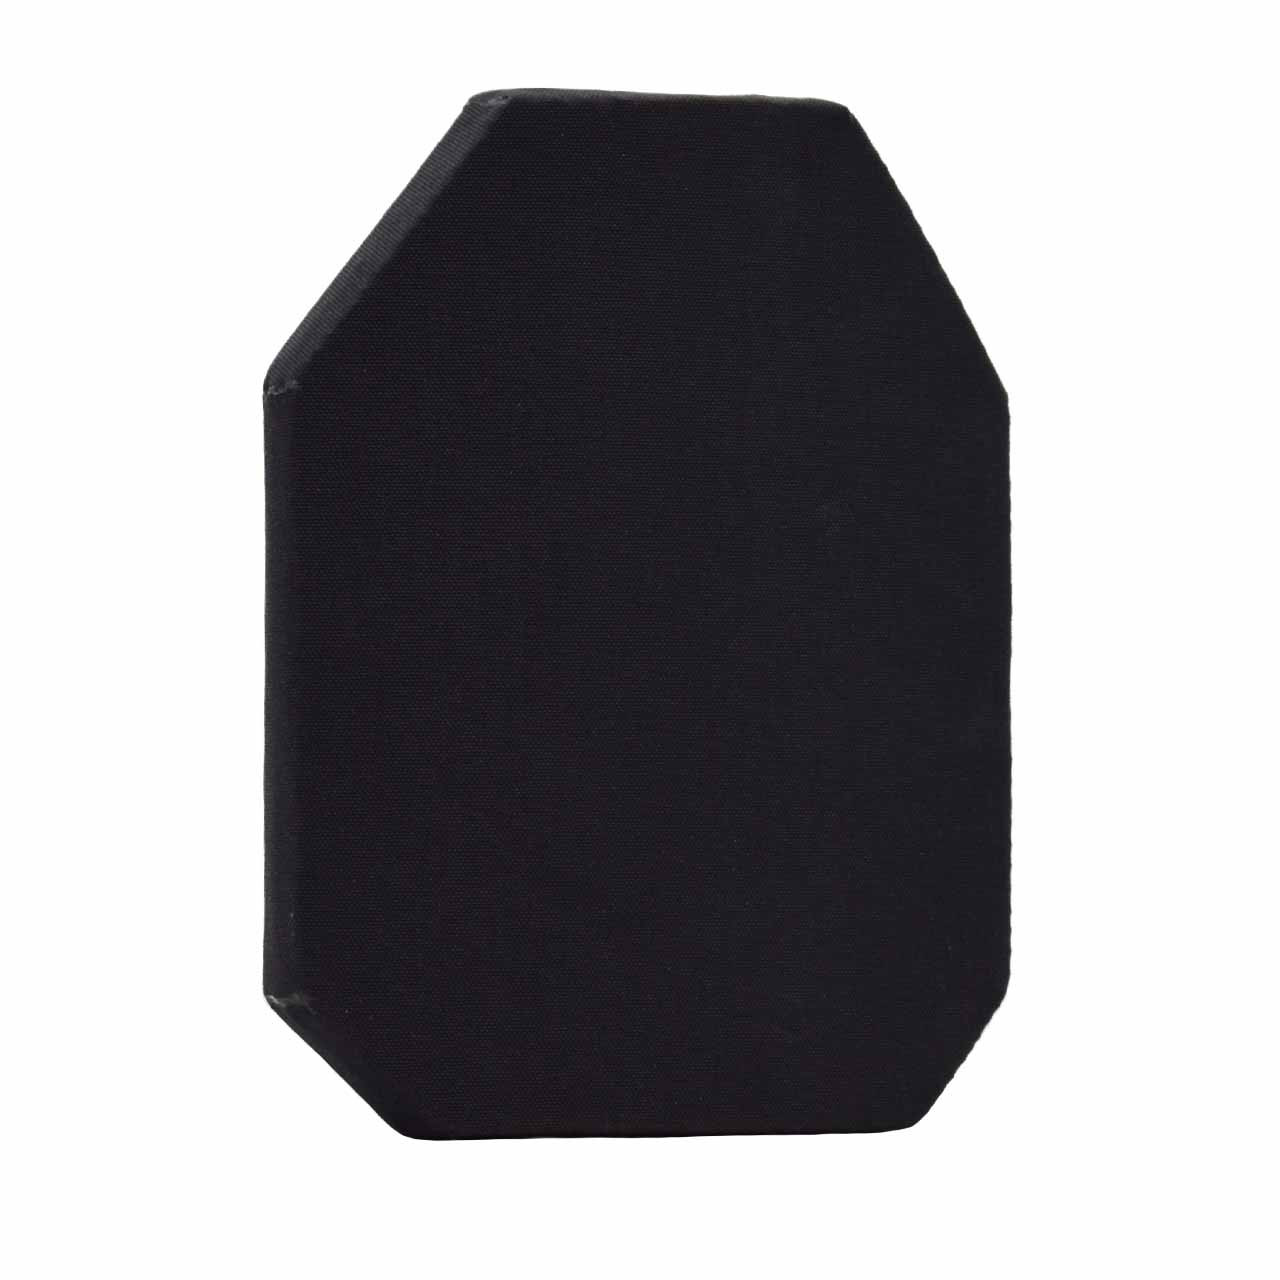 Shellback Tactical Prevail Series 10 x 12 NIJ 0101.06 Certified Level IV Hard Armor Plate Model 4S17